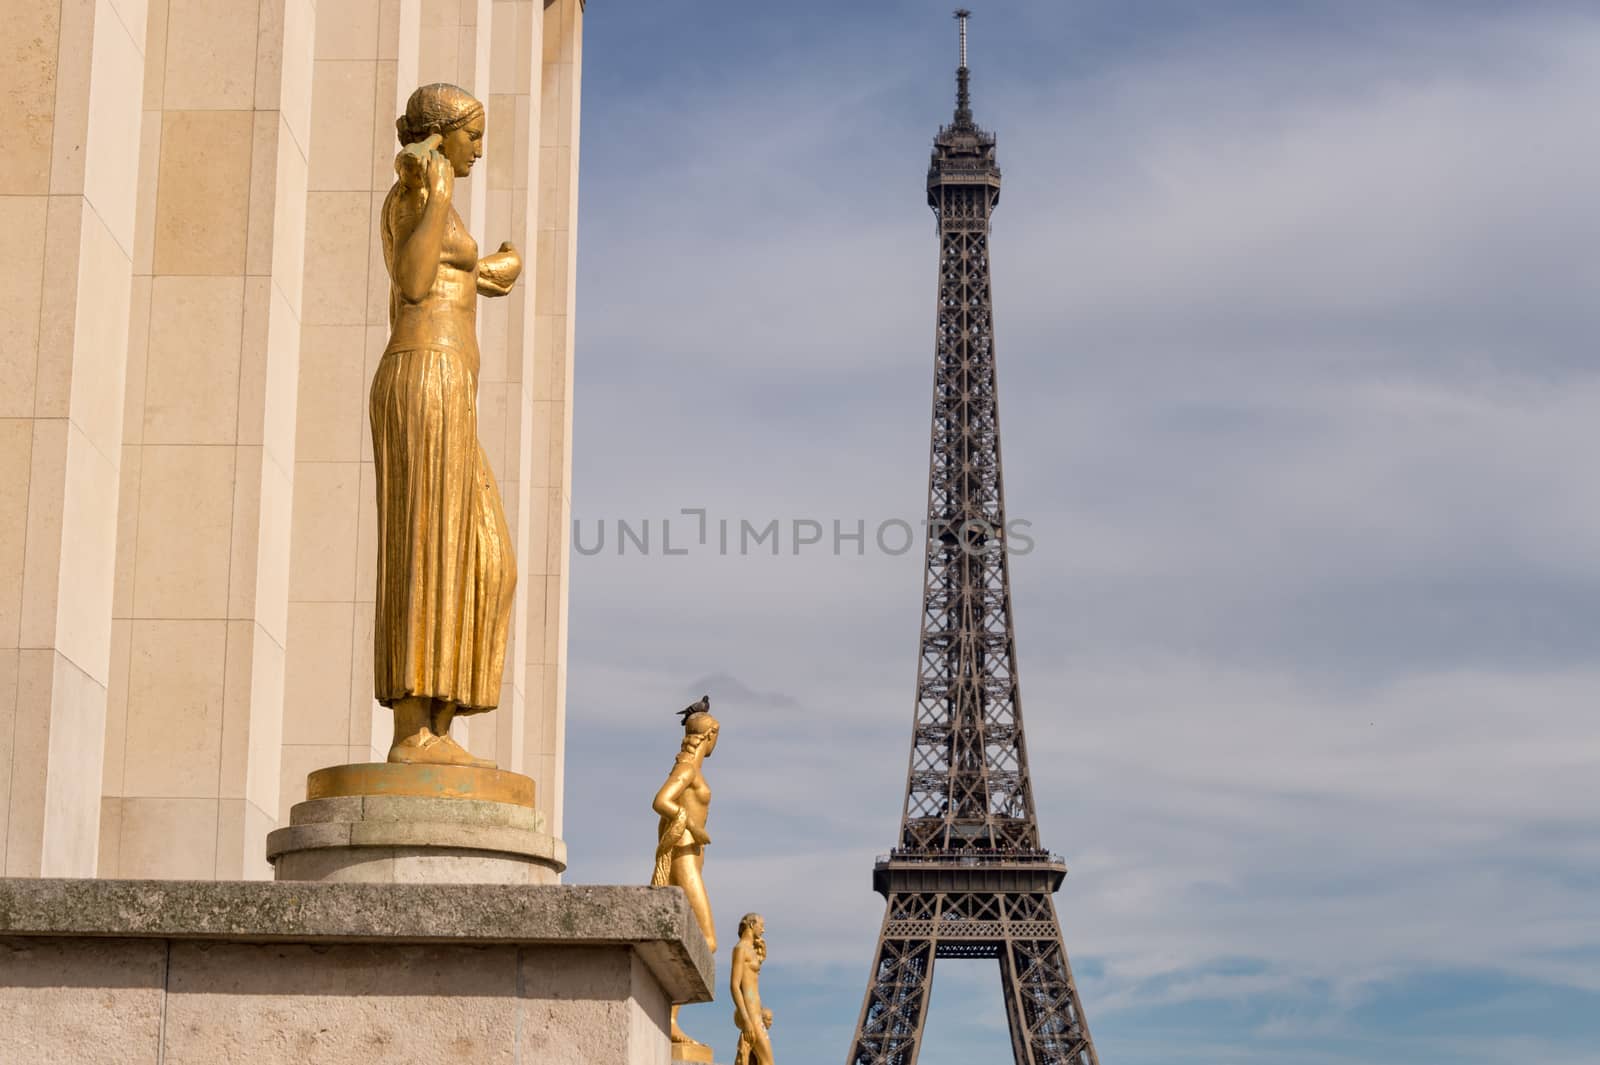 Paris, France - 23 June 2018: Eiffel Tower from Trocadero with golden statues in the foreground